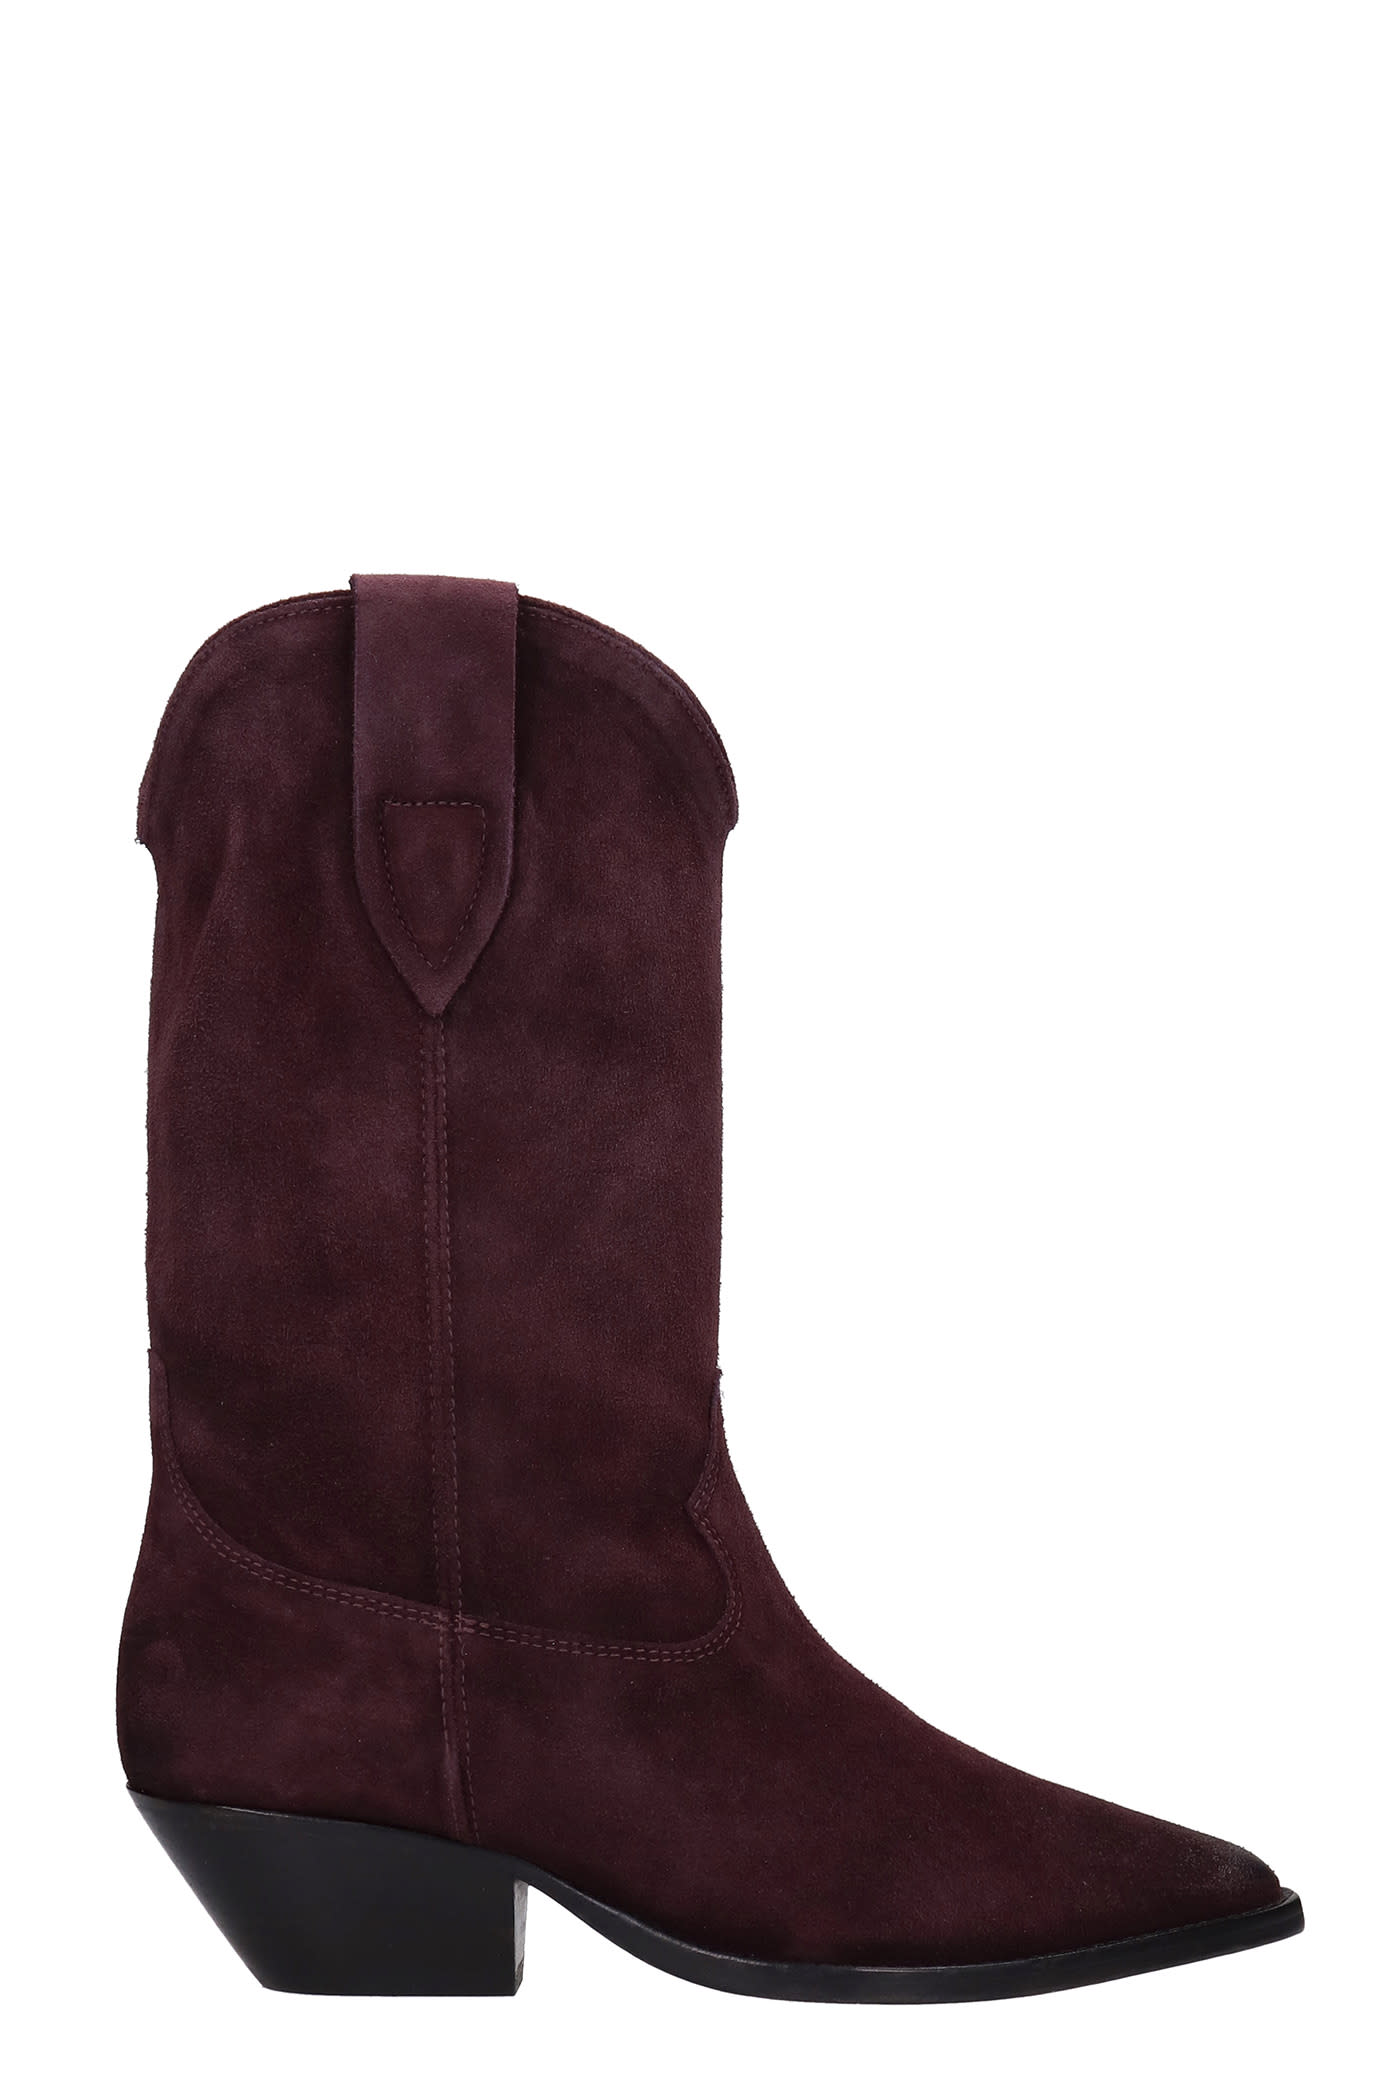 Isabel Marant Deurto Texan Ankle Boots In Bordeaux Suede